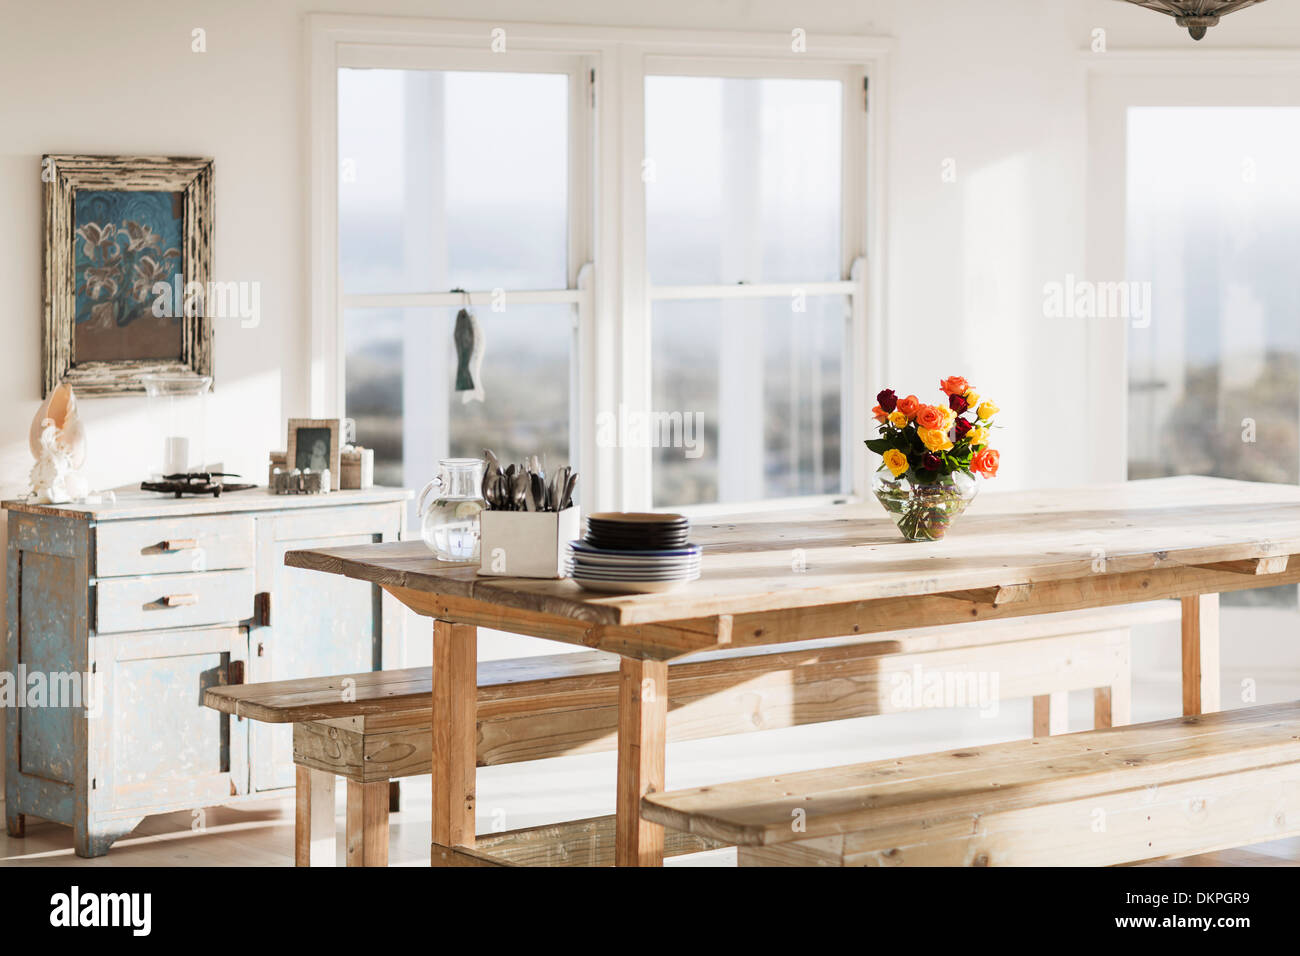 Wooden table in dining room Stock Photo